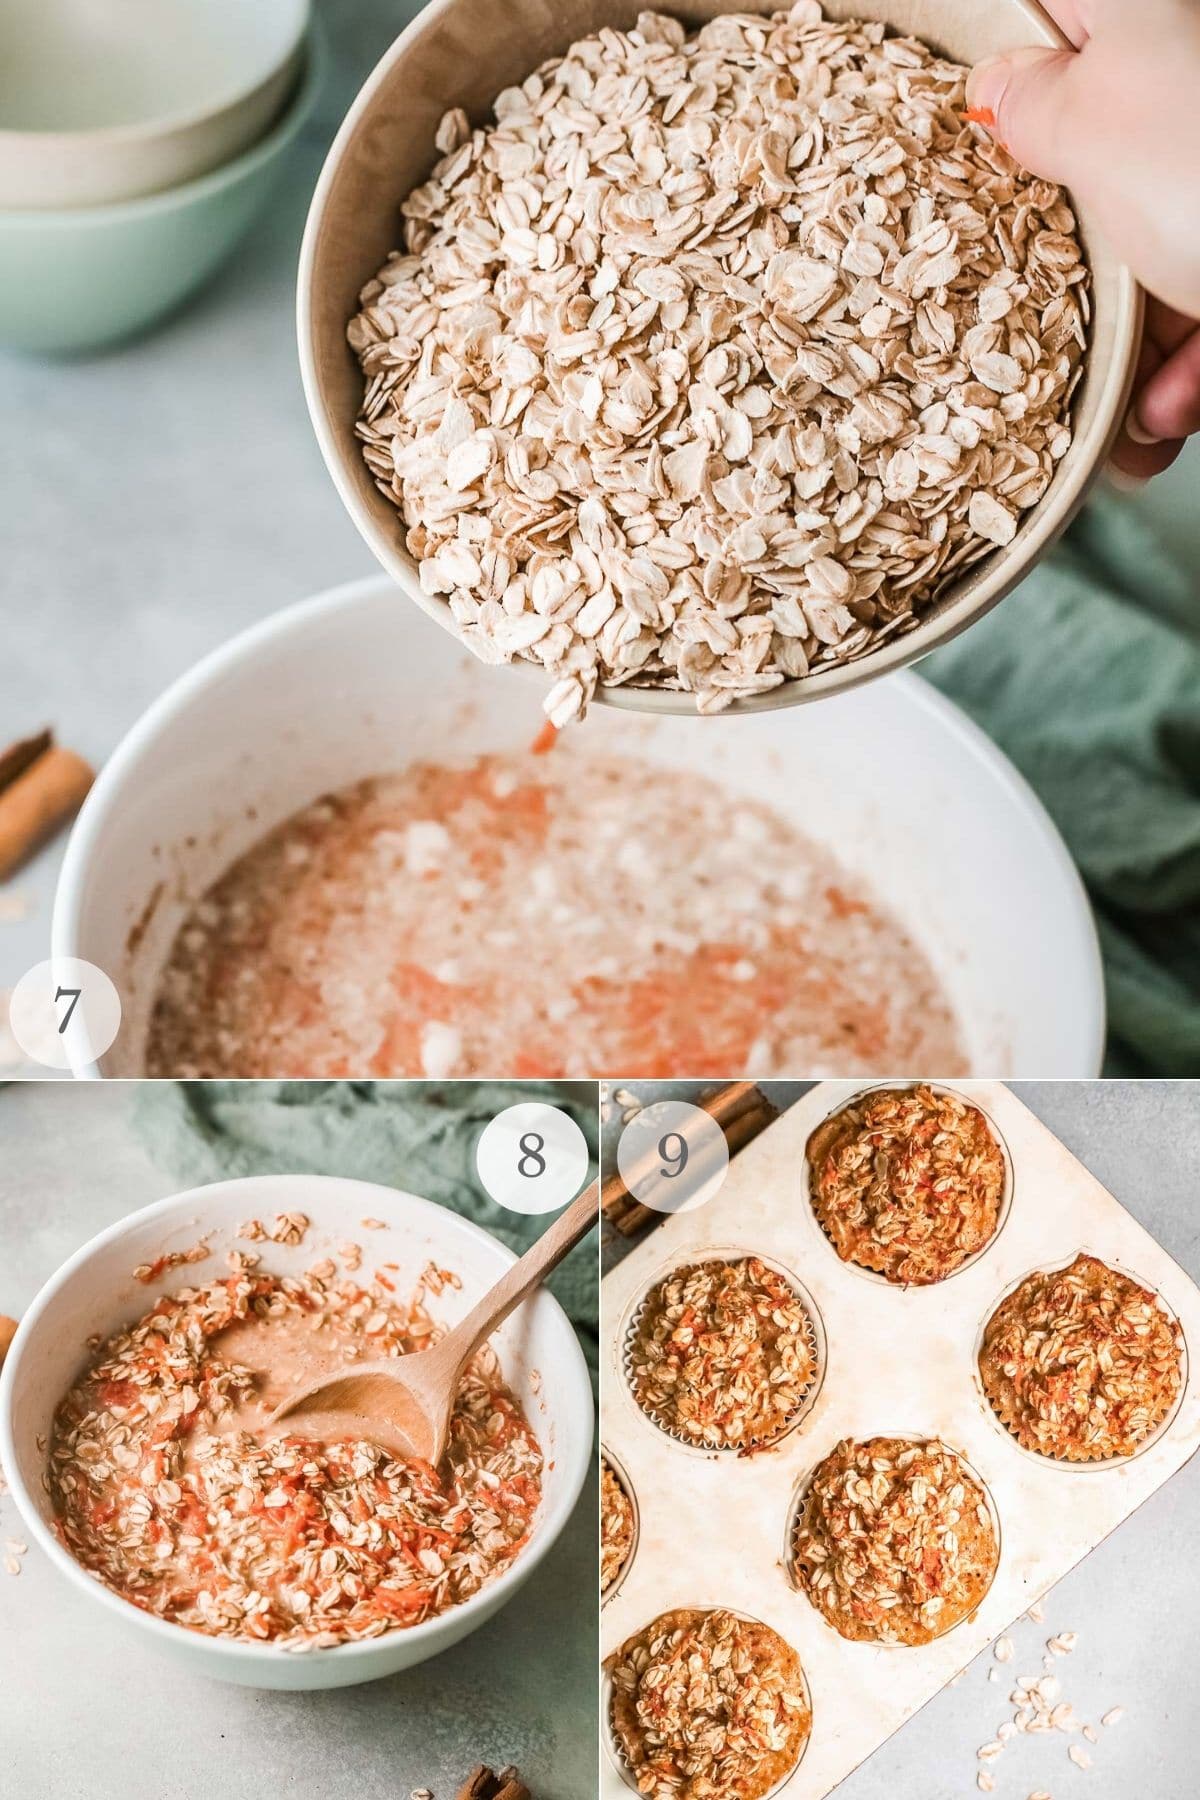 baked oatmeal cups recipe steps 7-9